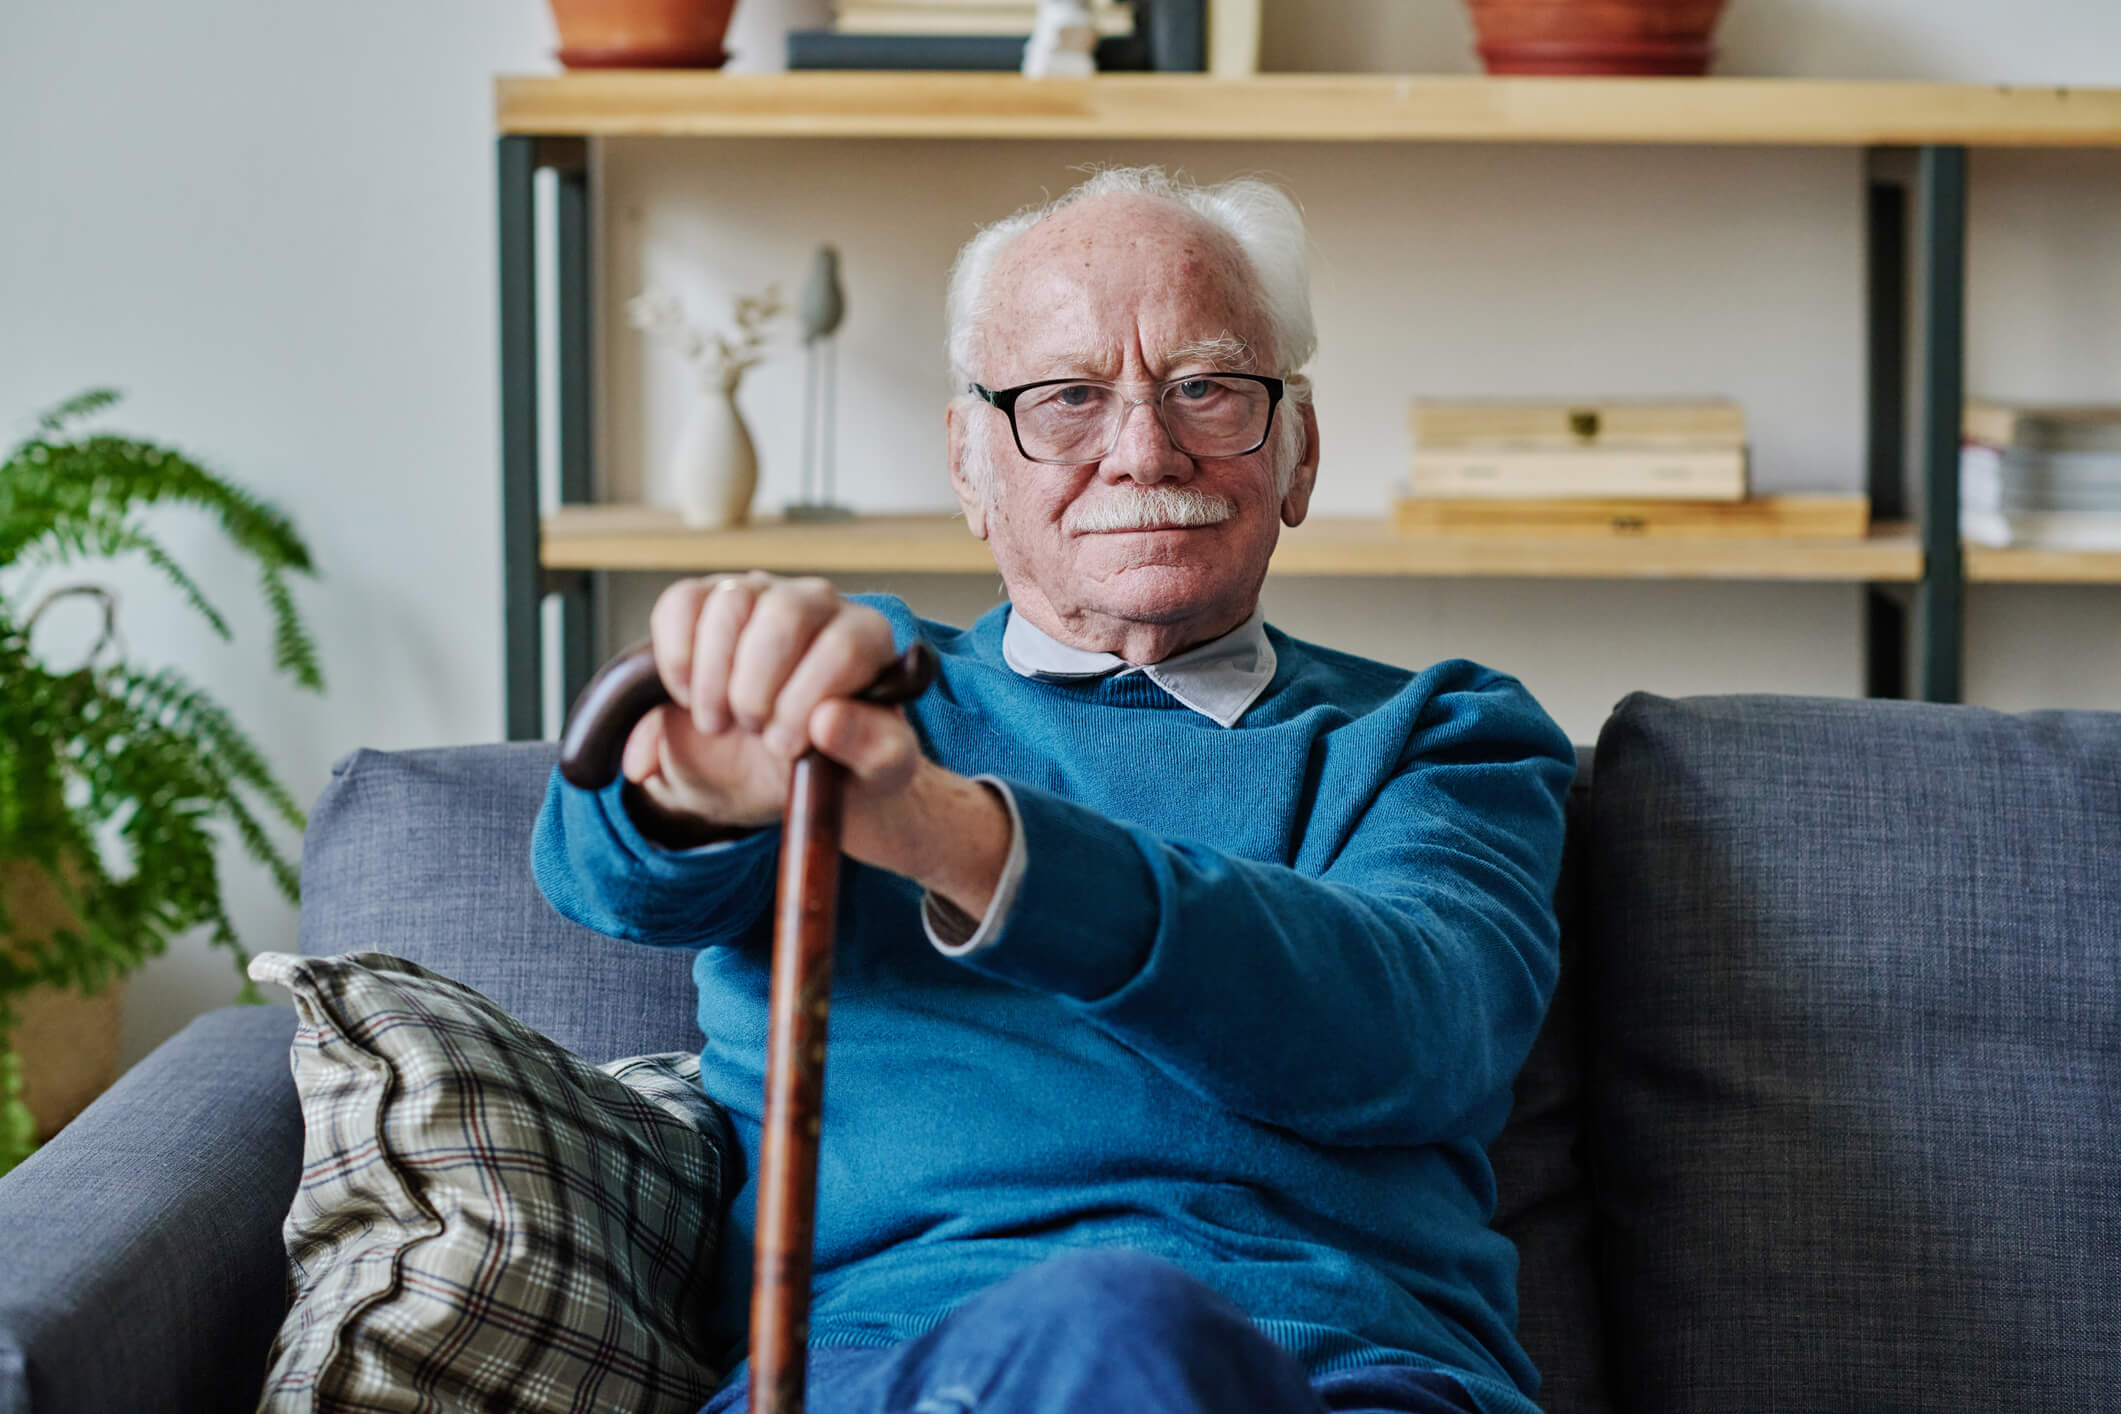 An older man is sitting on a couch and looking straight ahead; he is holding a cane and is smiling.